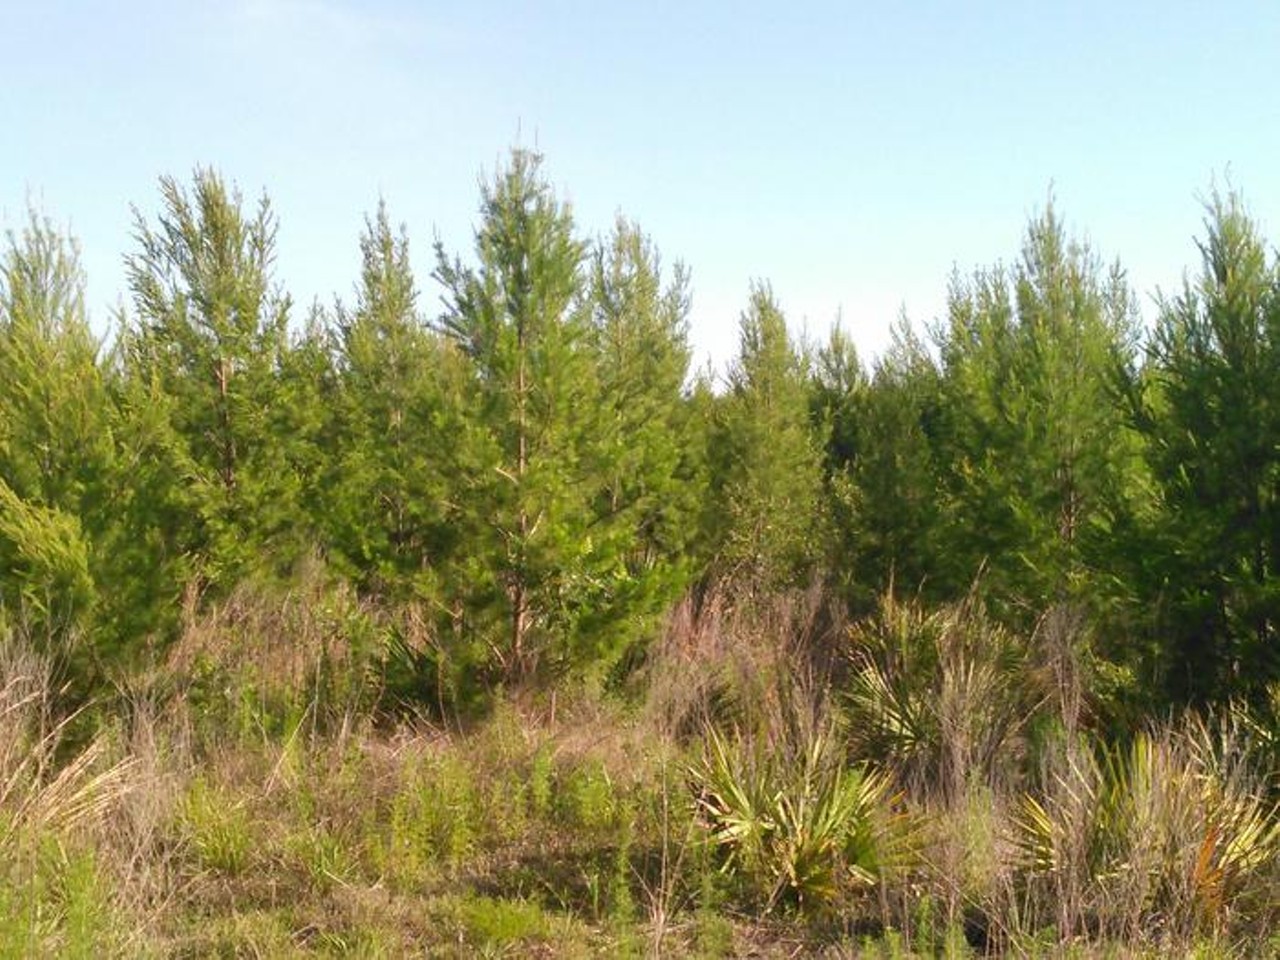 Ocala National Forest Christmas Tree U-Pick 
352-625-2520, 40 Silver Springs.
Cut down your very own Christmas tree at the Ocala National Forest. All that&#146;s required is a $5 permit that can be purchased online. 
Photo via U.S. Government Recreation/Website